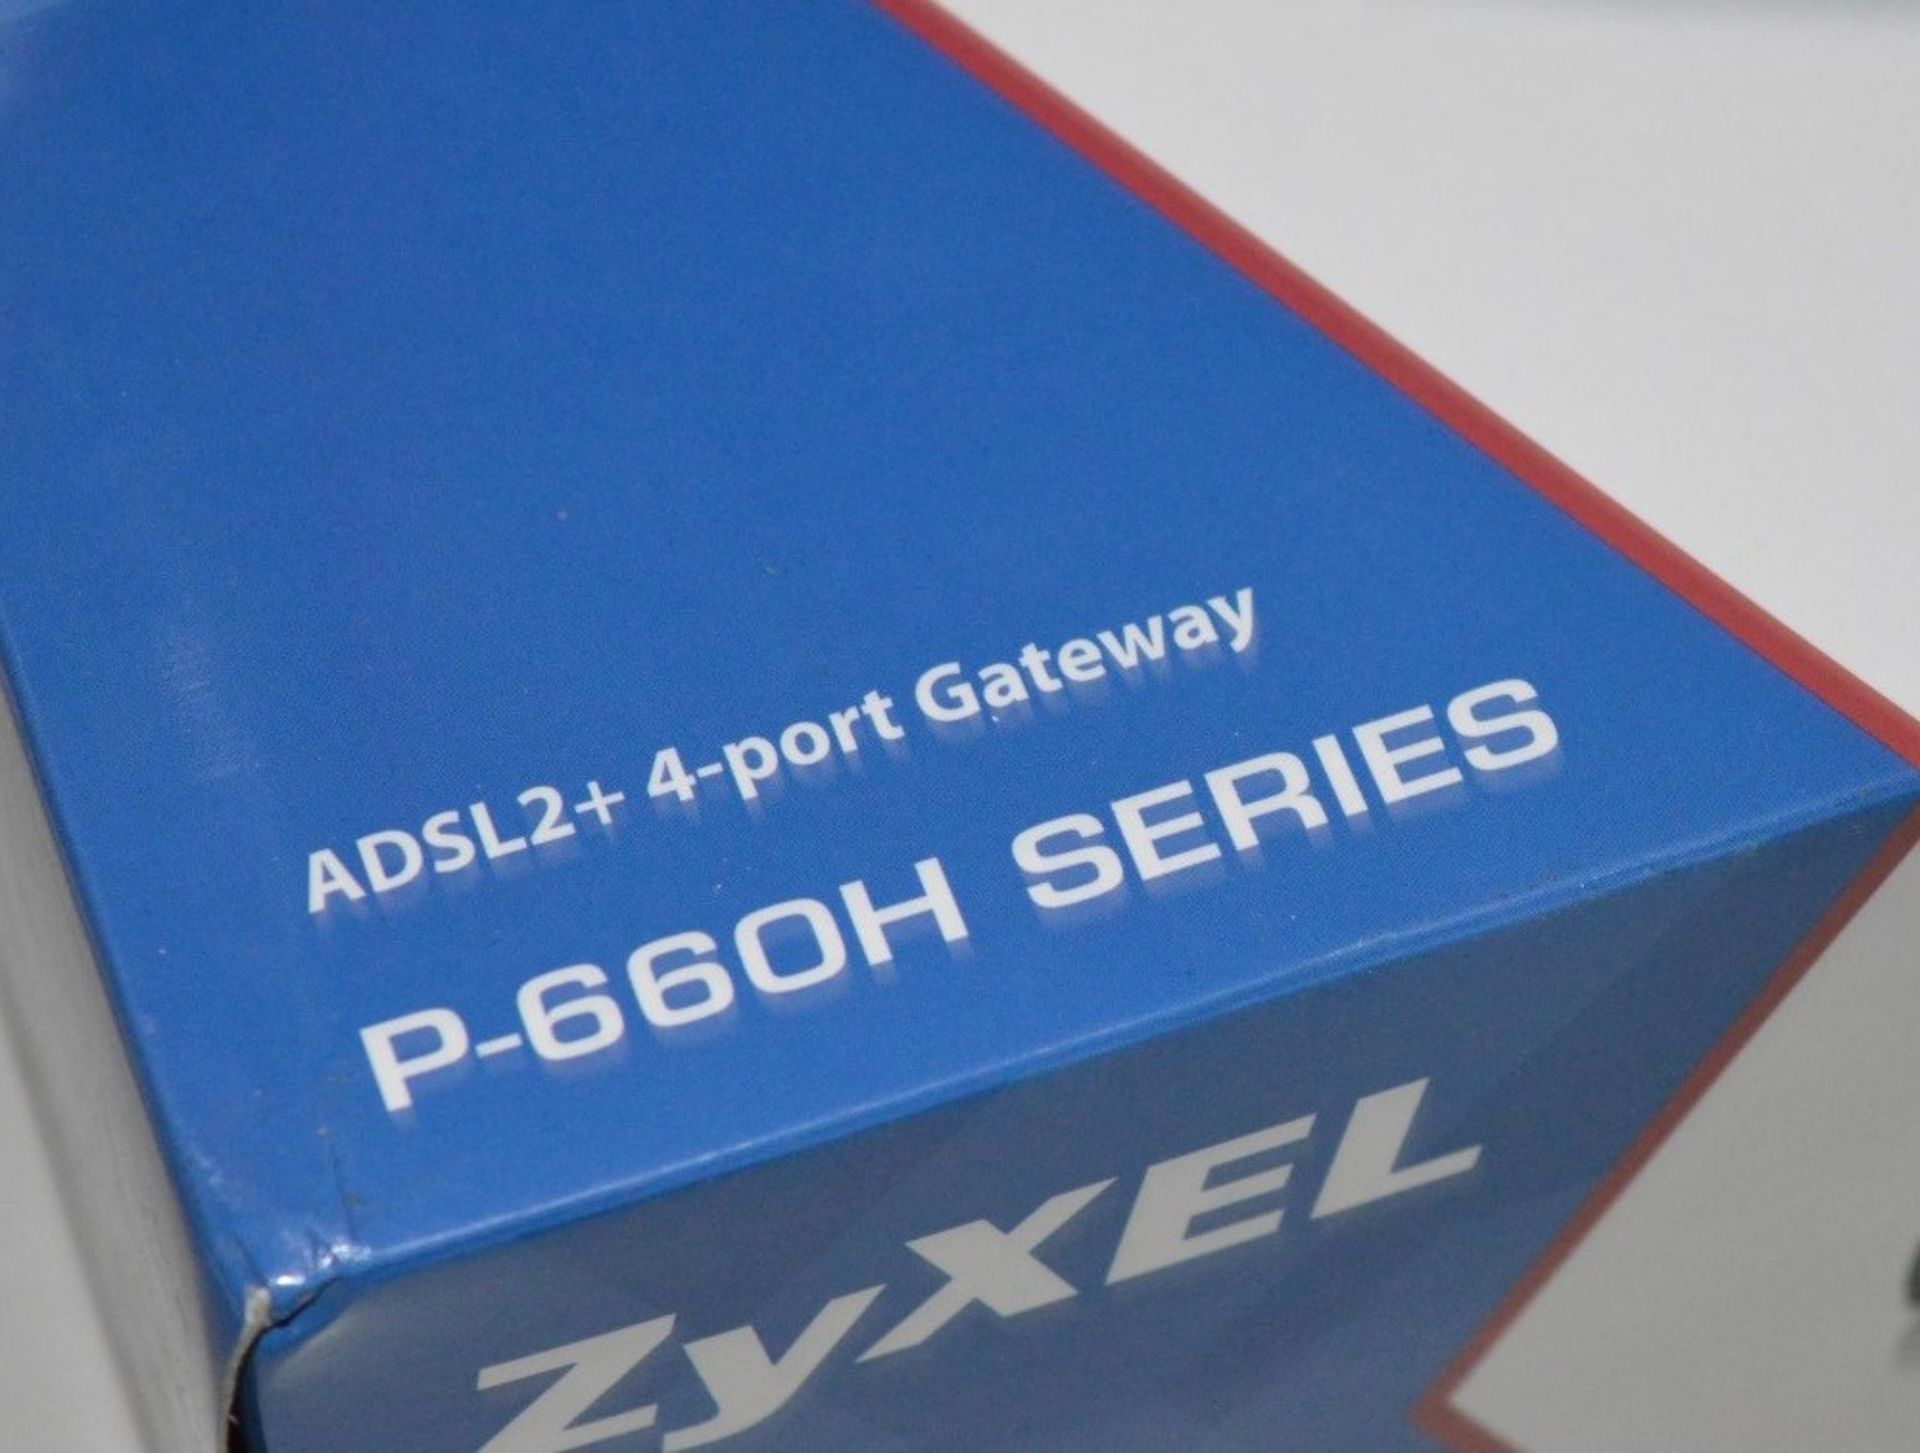 1 x Zyxel Ultra High Speed ASL2+ Gateway For SOHO Networks Router - Model P-660H - New and Sealed - - Image 2 of 3